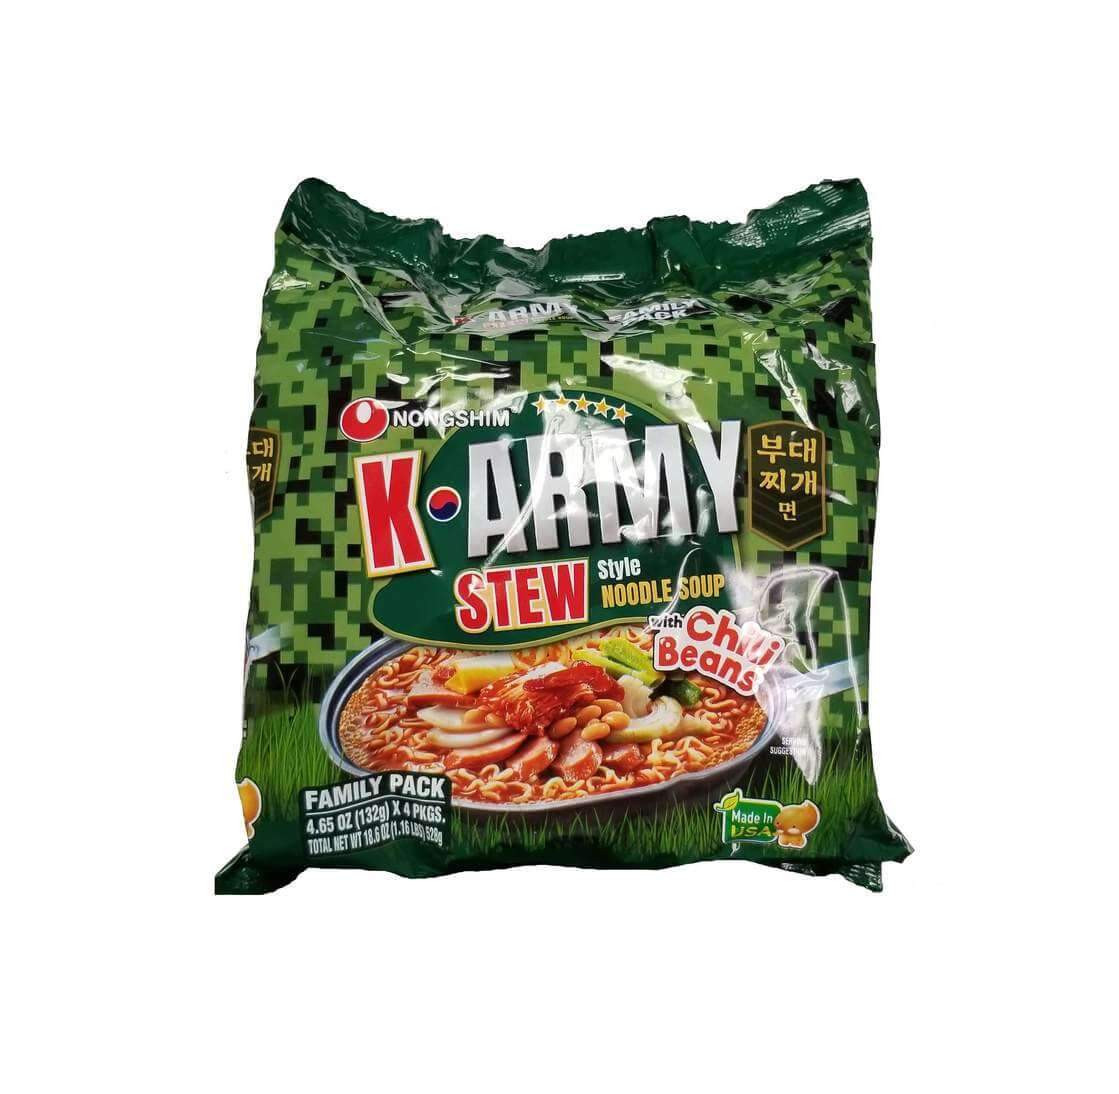 K-Army Stew Ramen with Chilli Beans 4 Pack - Grace Market 